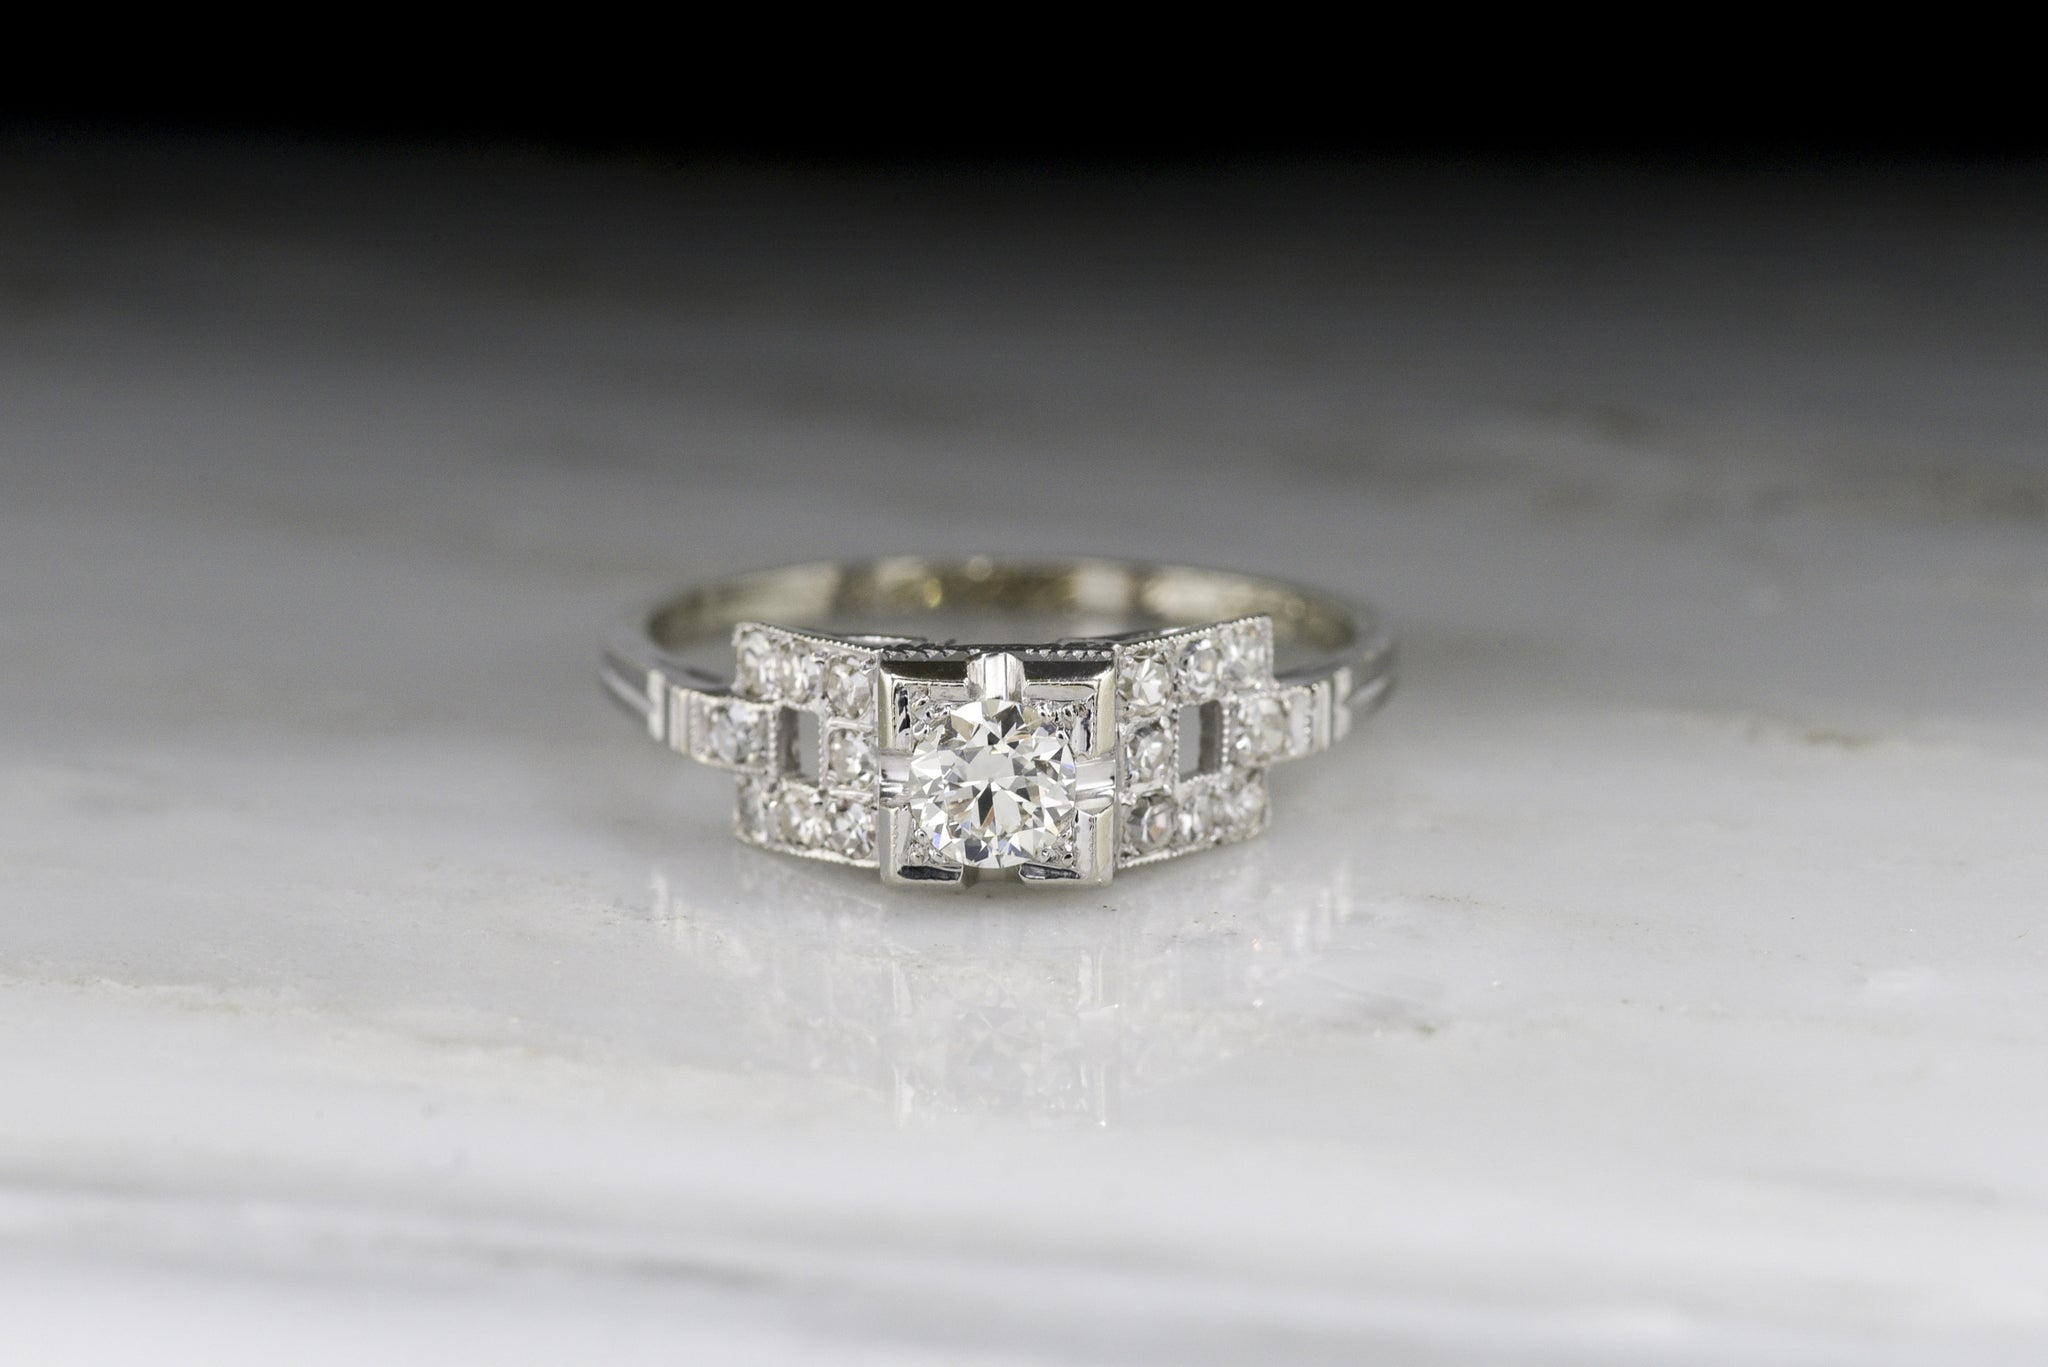 1932 Art Deco Engagement Ring With Geometric Shoulders